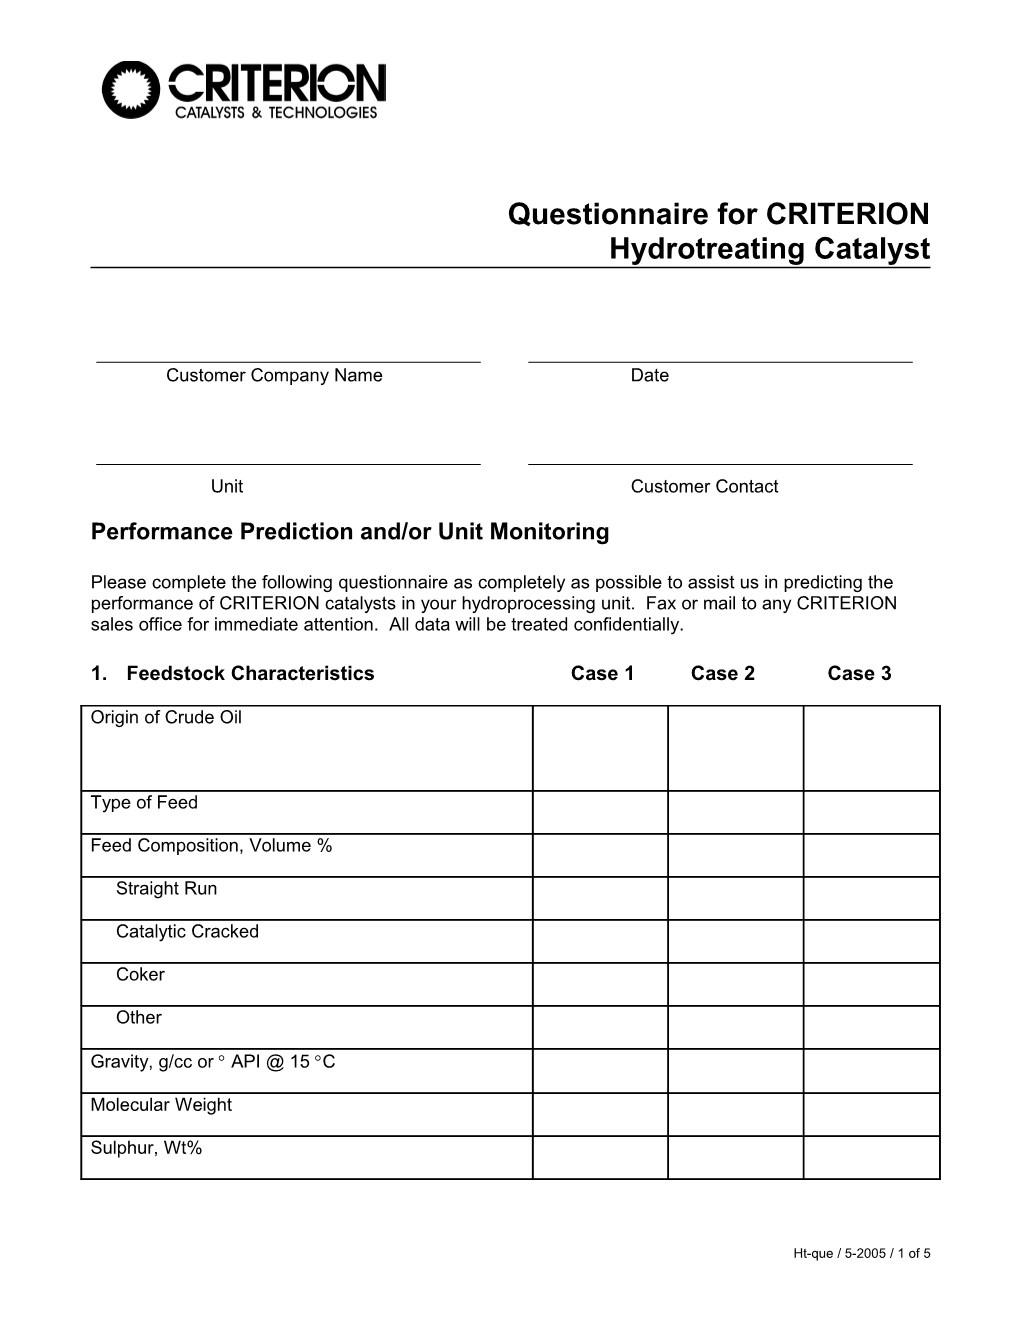 Questionnaire for CRITERION